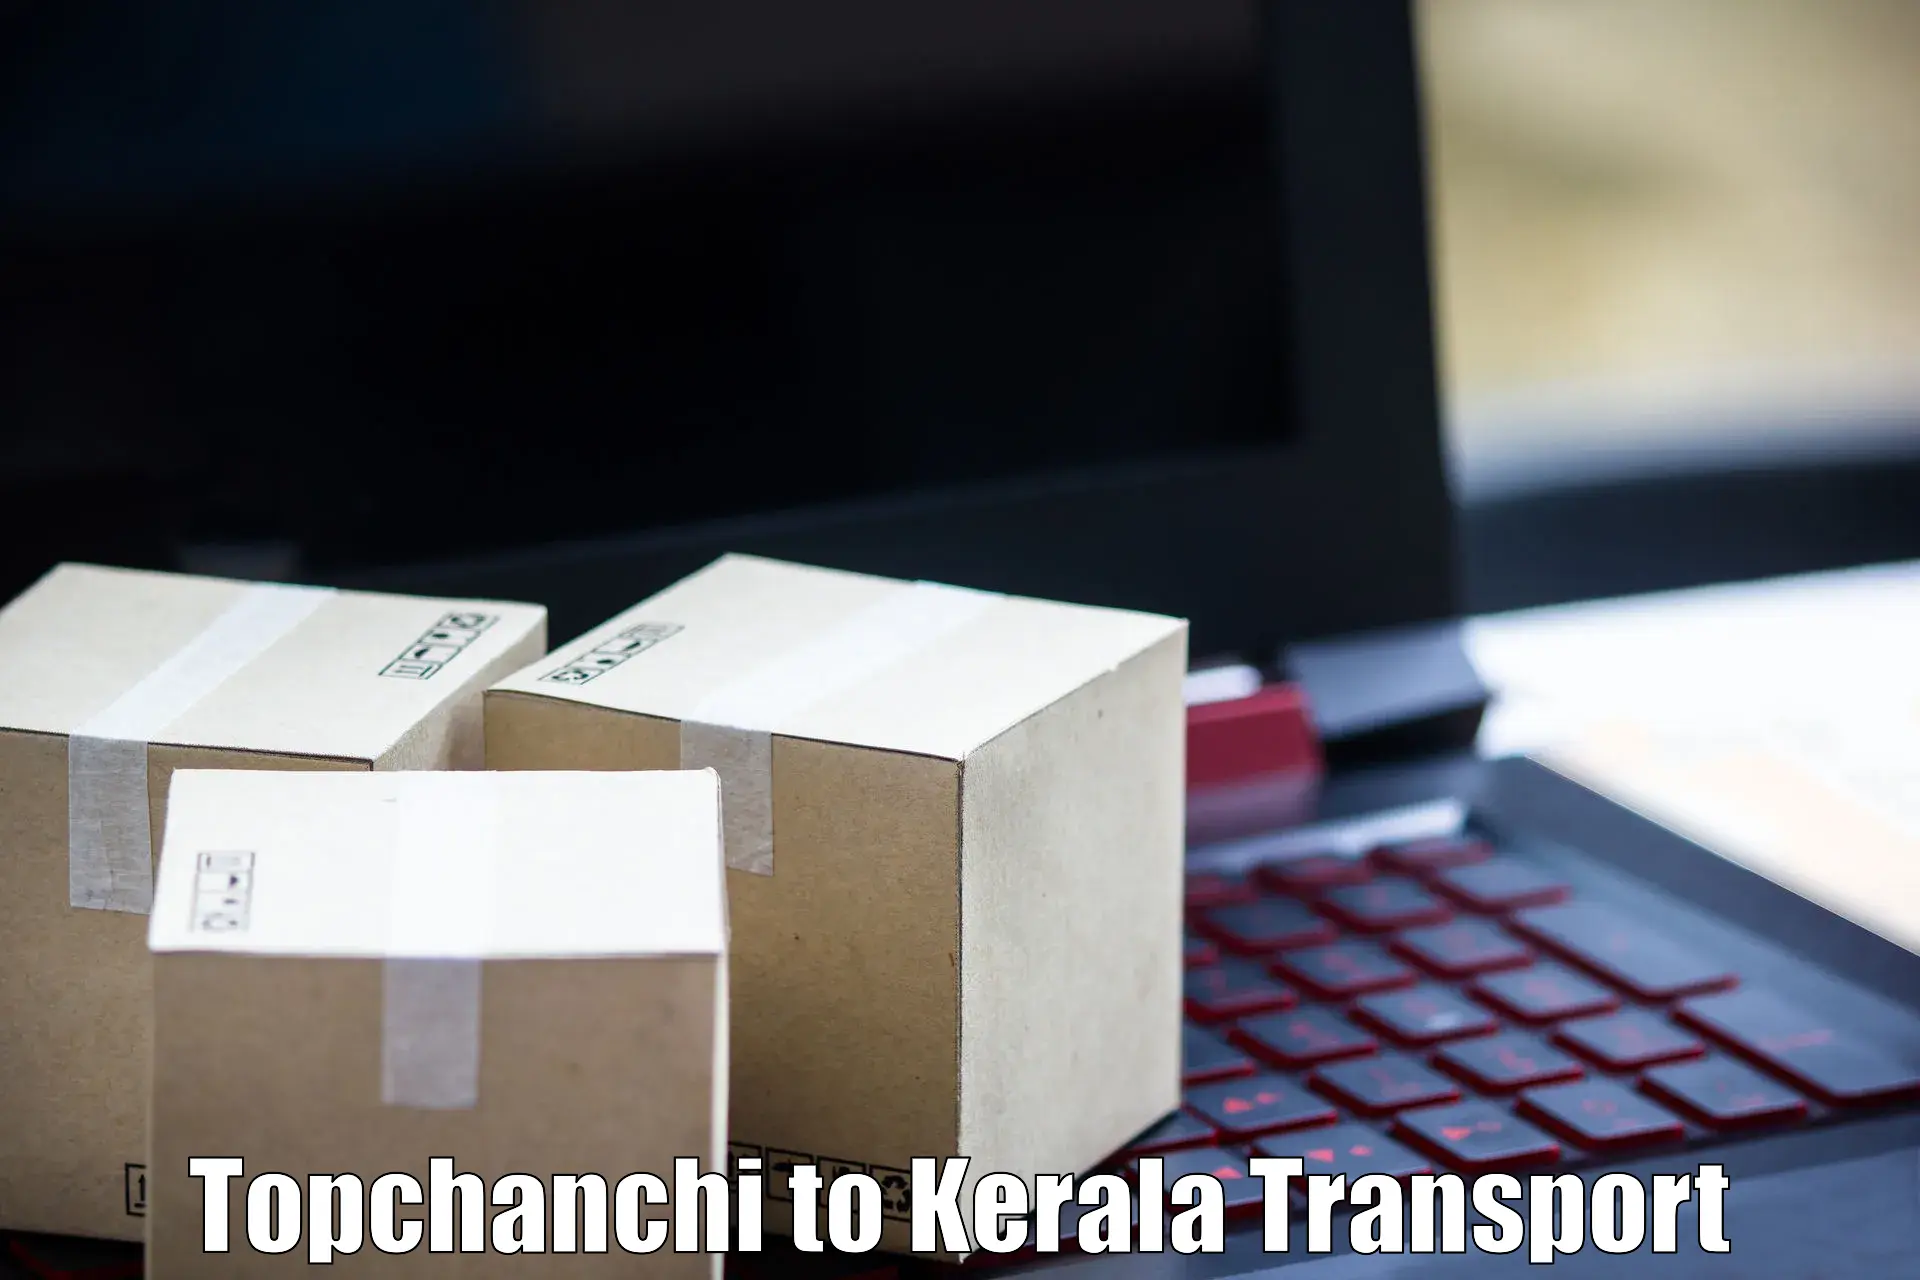 Road transport online services Topchanchi to Chungathara